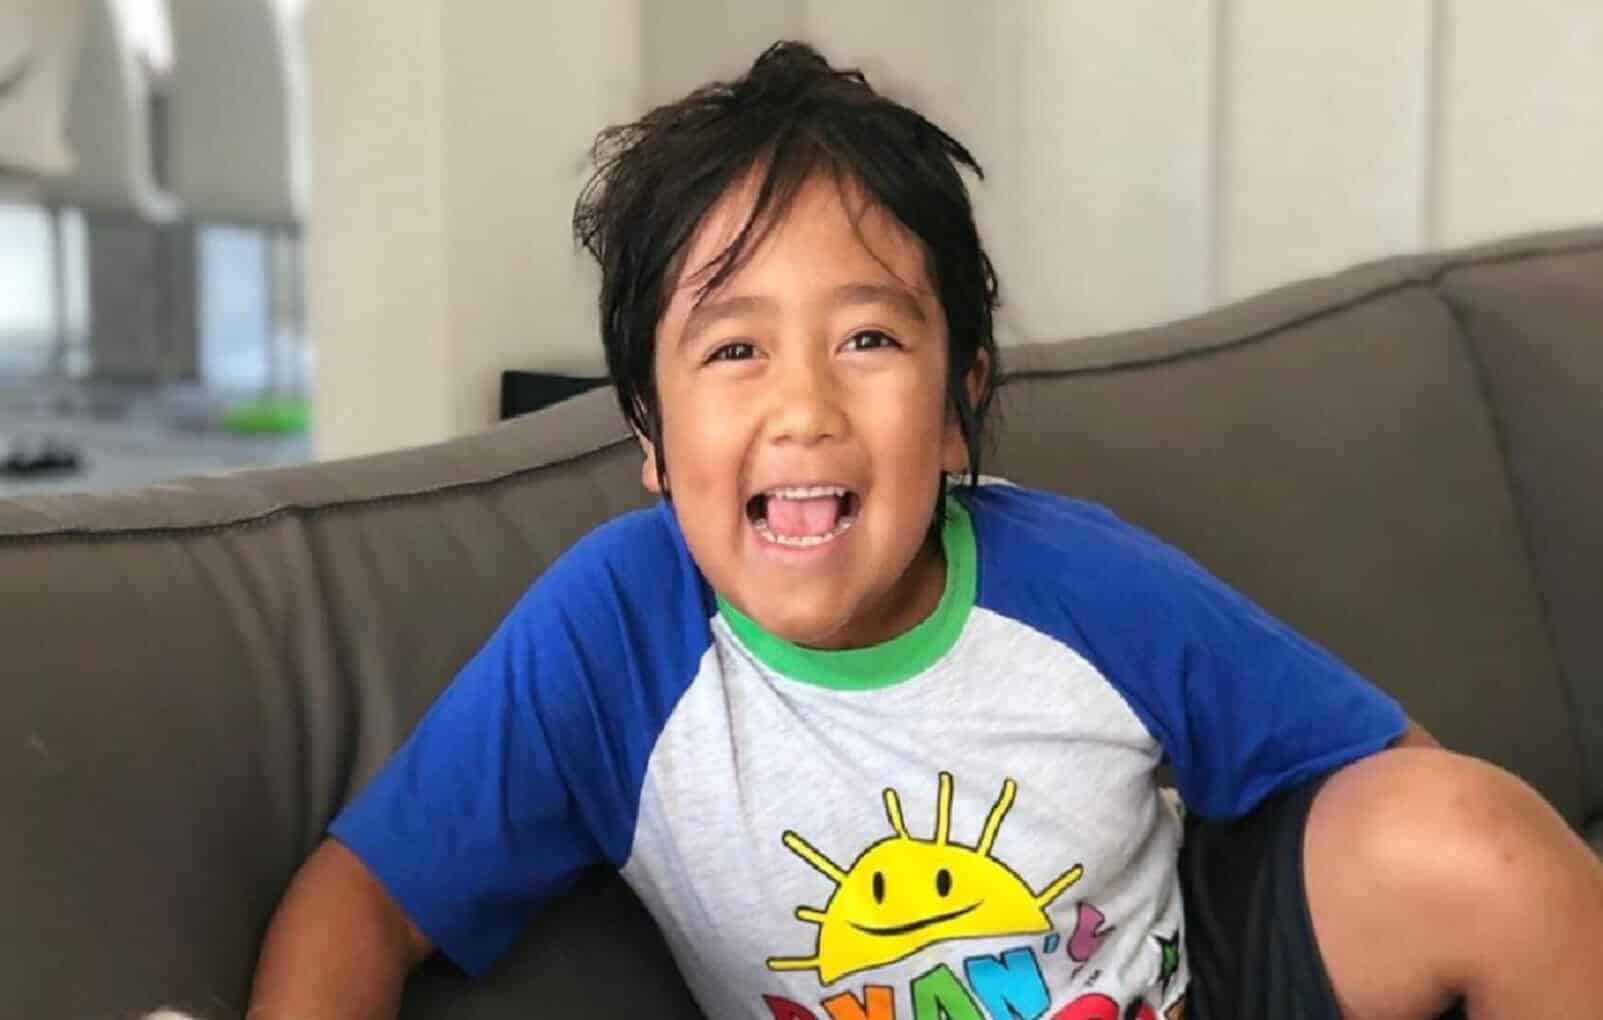 How old is Ryan Toysreview? age, net worth, girlfriend, family and